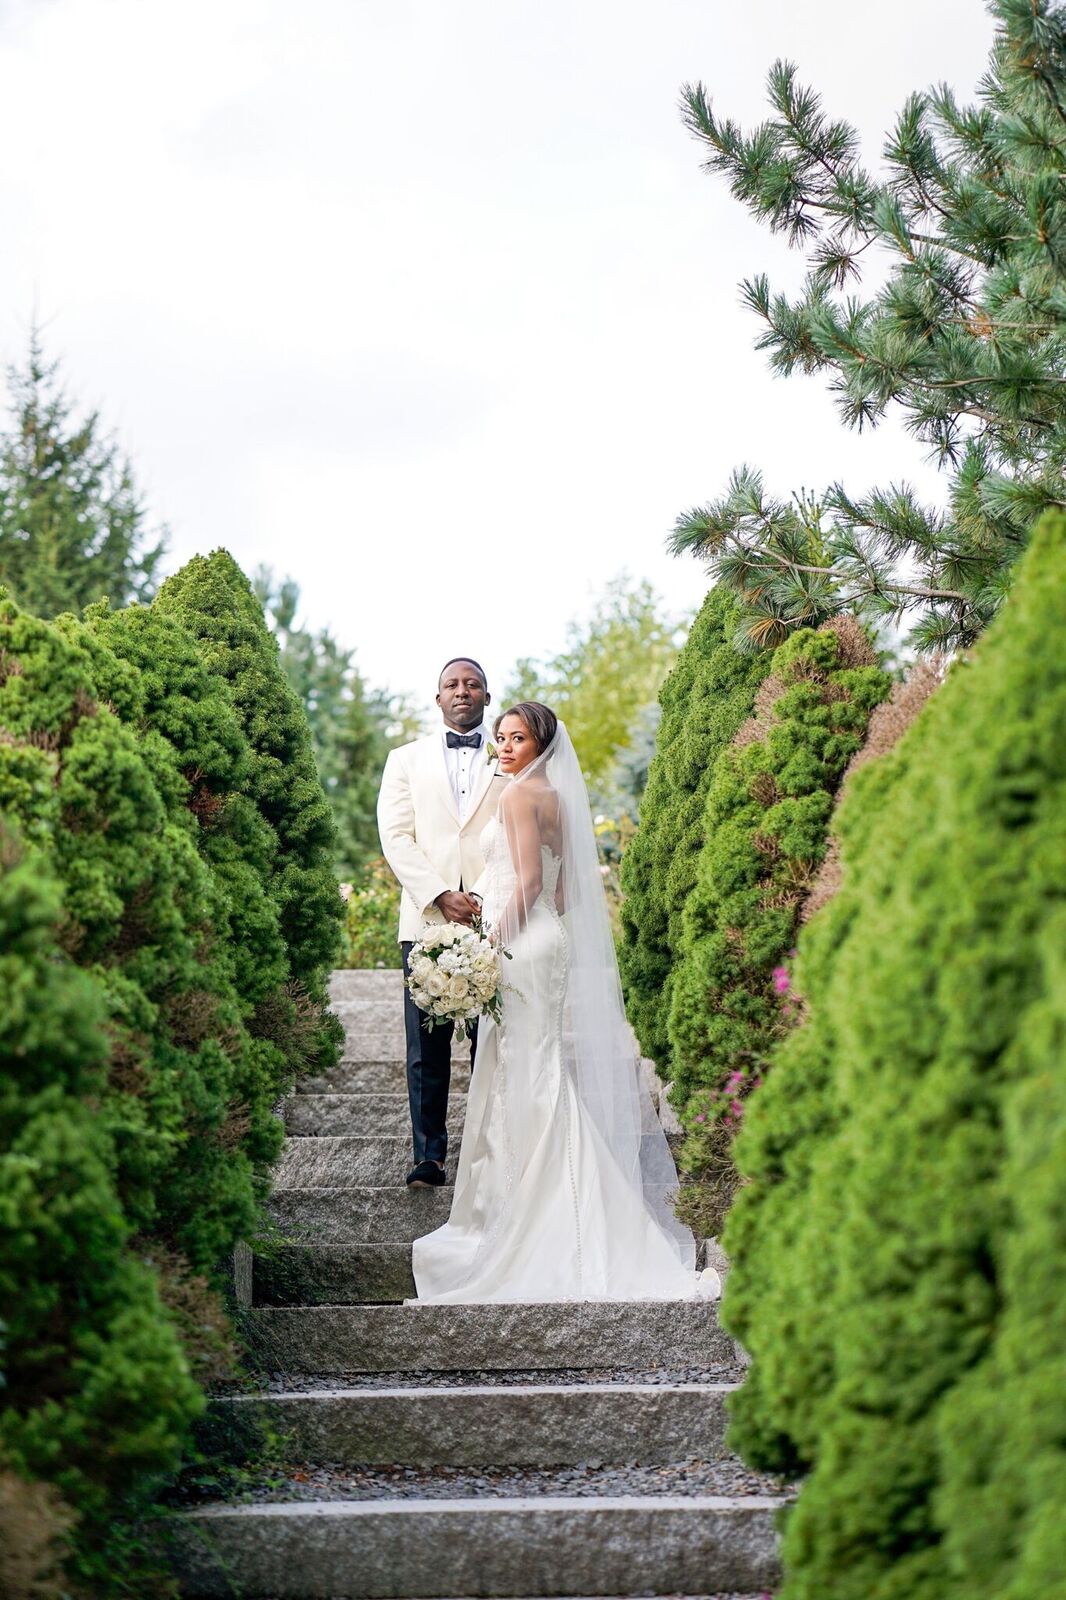 A breathtaking garden wedding at Grounds for Sculpture that we planned for this New York City couple. Read the blog to get the wedding day details and see the chic photos from this celebration!